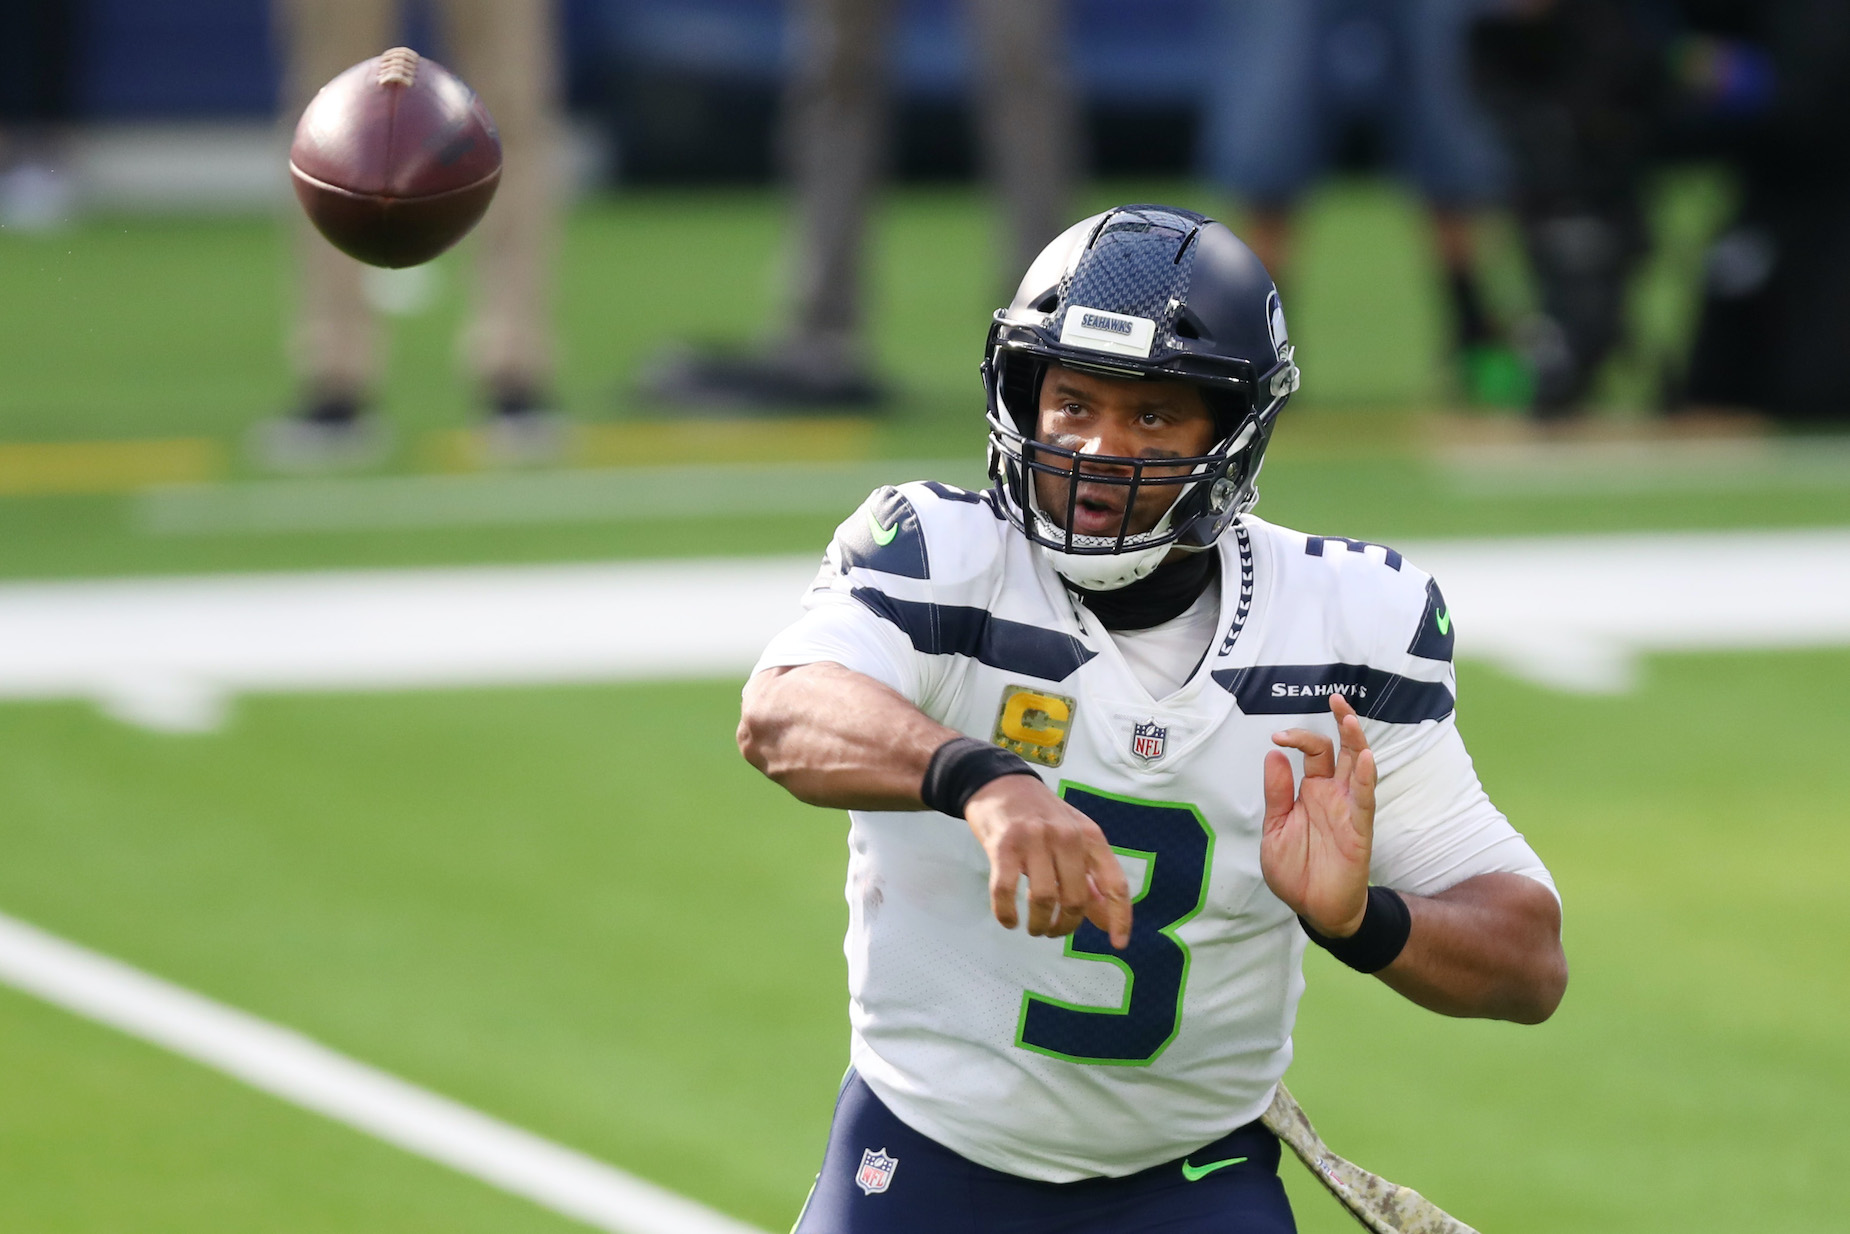 Seattle Seahawks quarterback Russell Wilson in action during the 2020 NFL campaign.